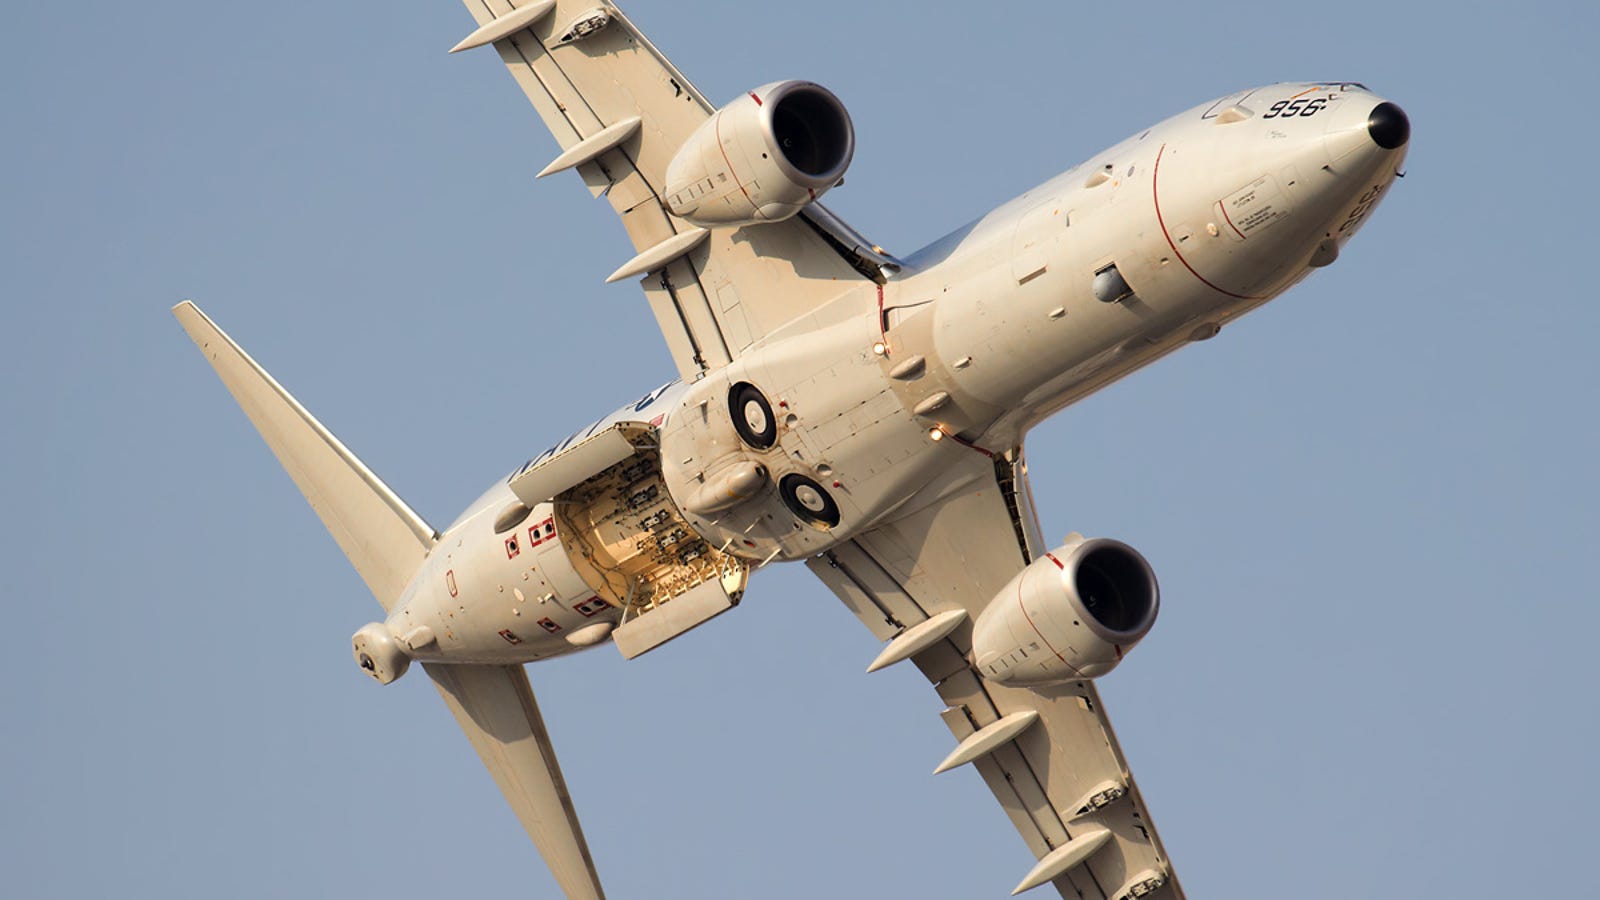 A Very "Intimate" View Of The Navy's New Star, The P-8 Poseidon